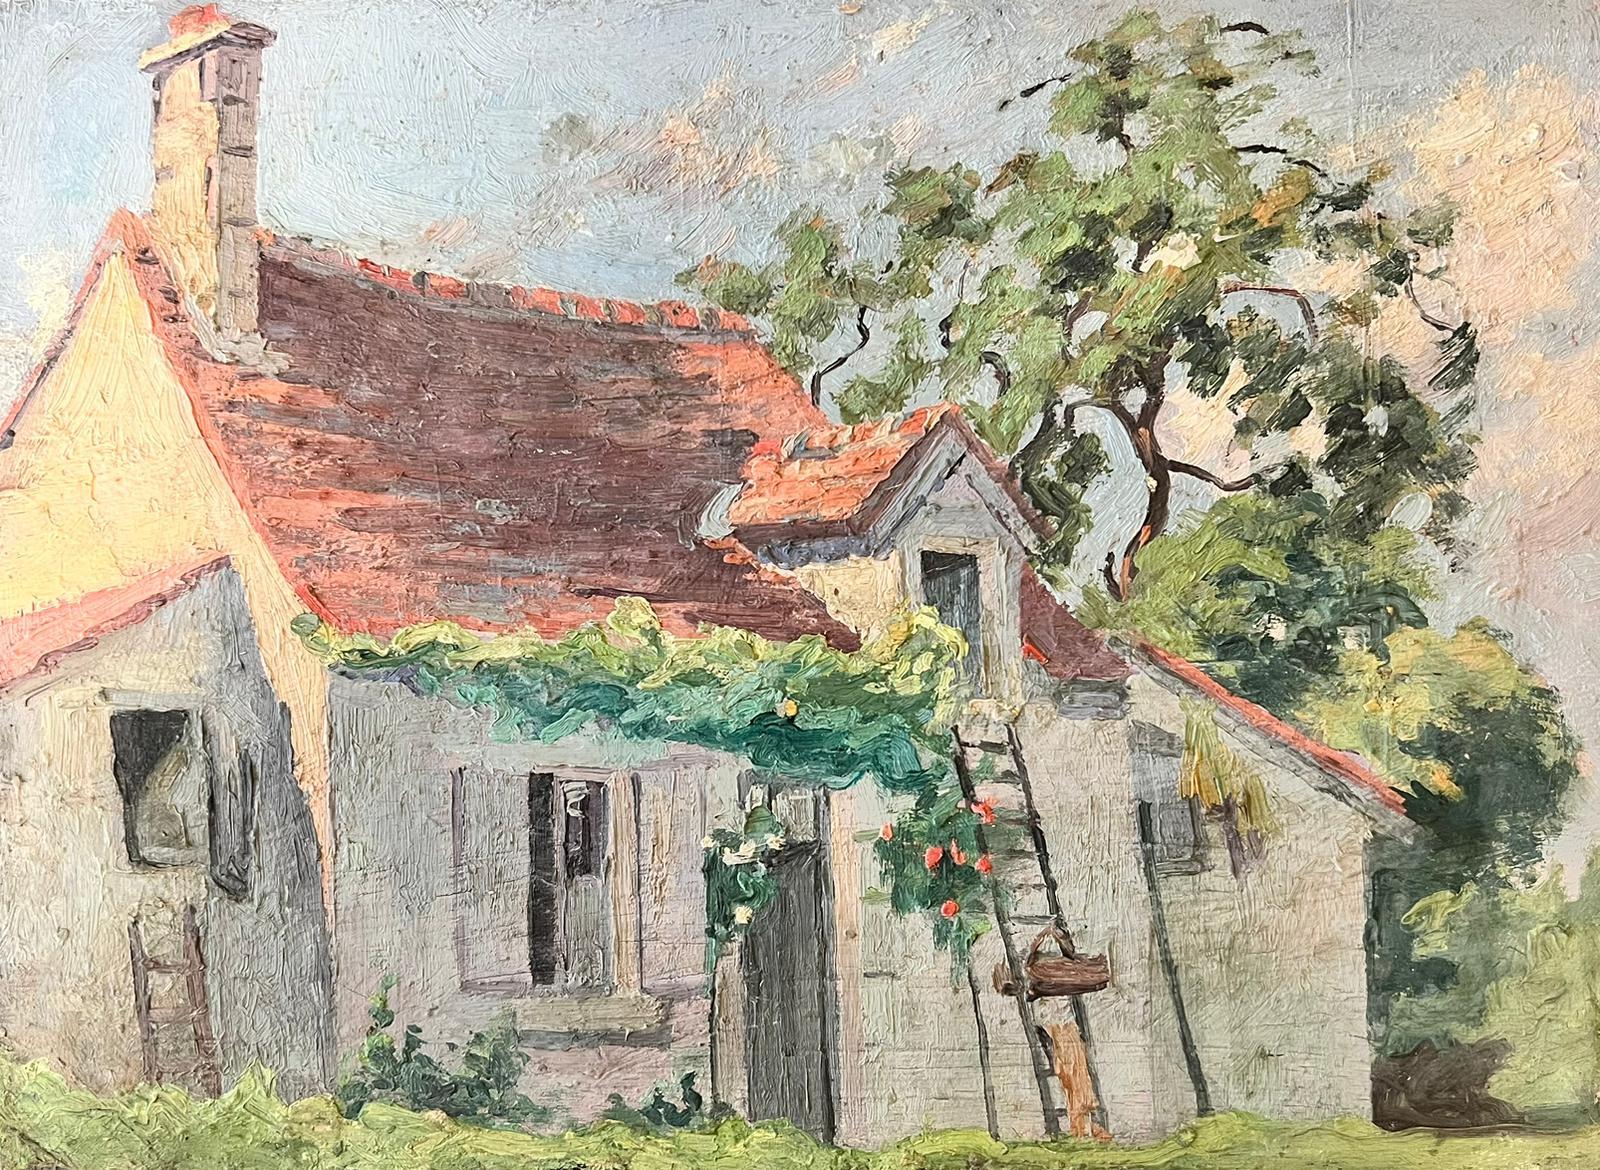 Suzanne Crochet Landscape Painting - 1930's French Post Impressionist Oil Painting - Stone Cottage With Ladder